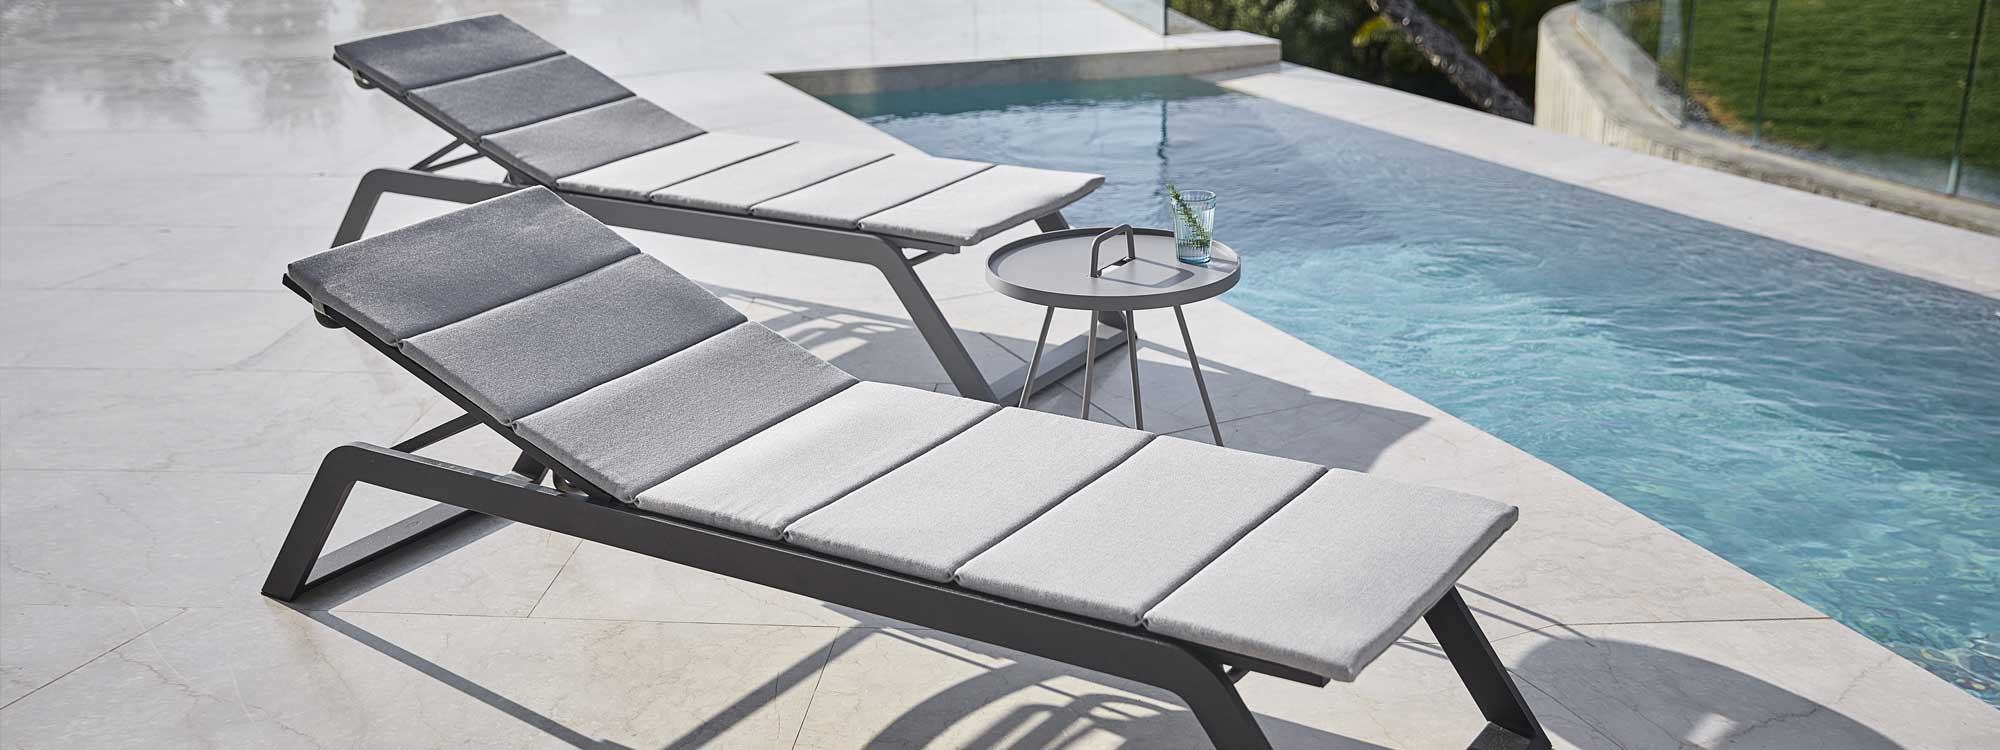 Image of pair of grey Rest sun loungers and On The Move tray table by Cane-line shown on poolside